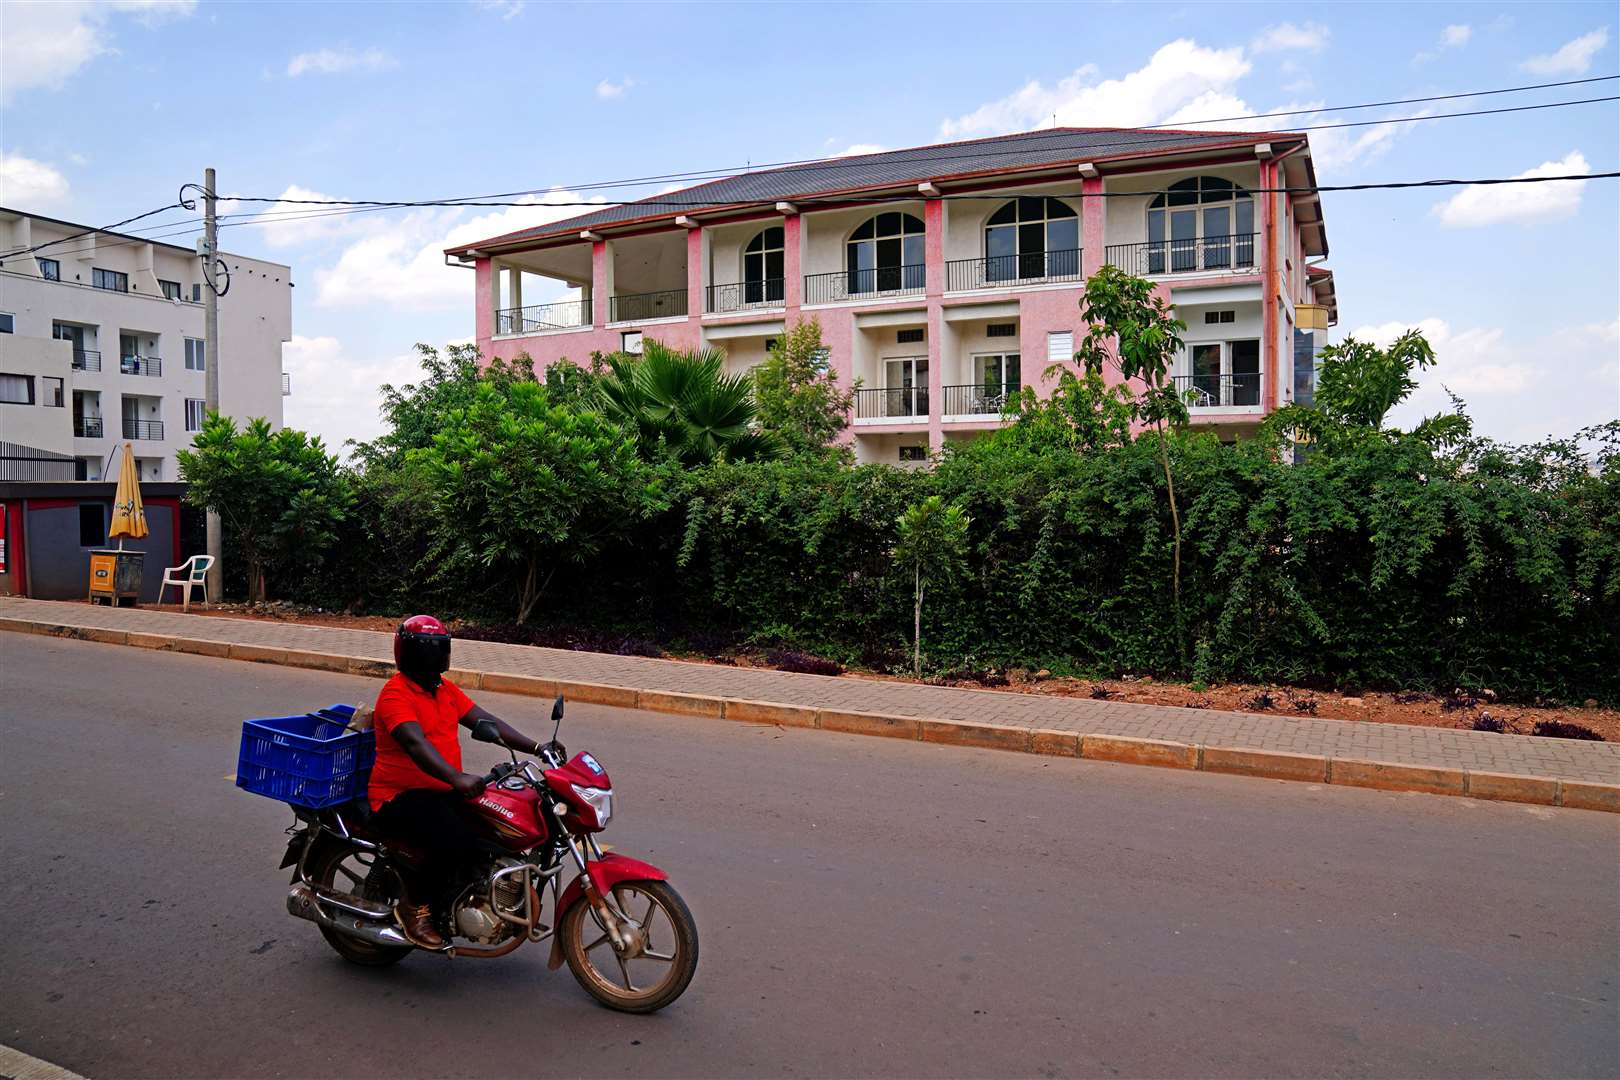 The Desir Resort Hotel in Kigali, Rwanda where it is believed migrants from the UK were expected to be taken (Victoria Jones/PA)